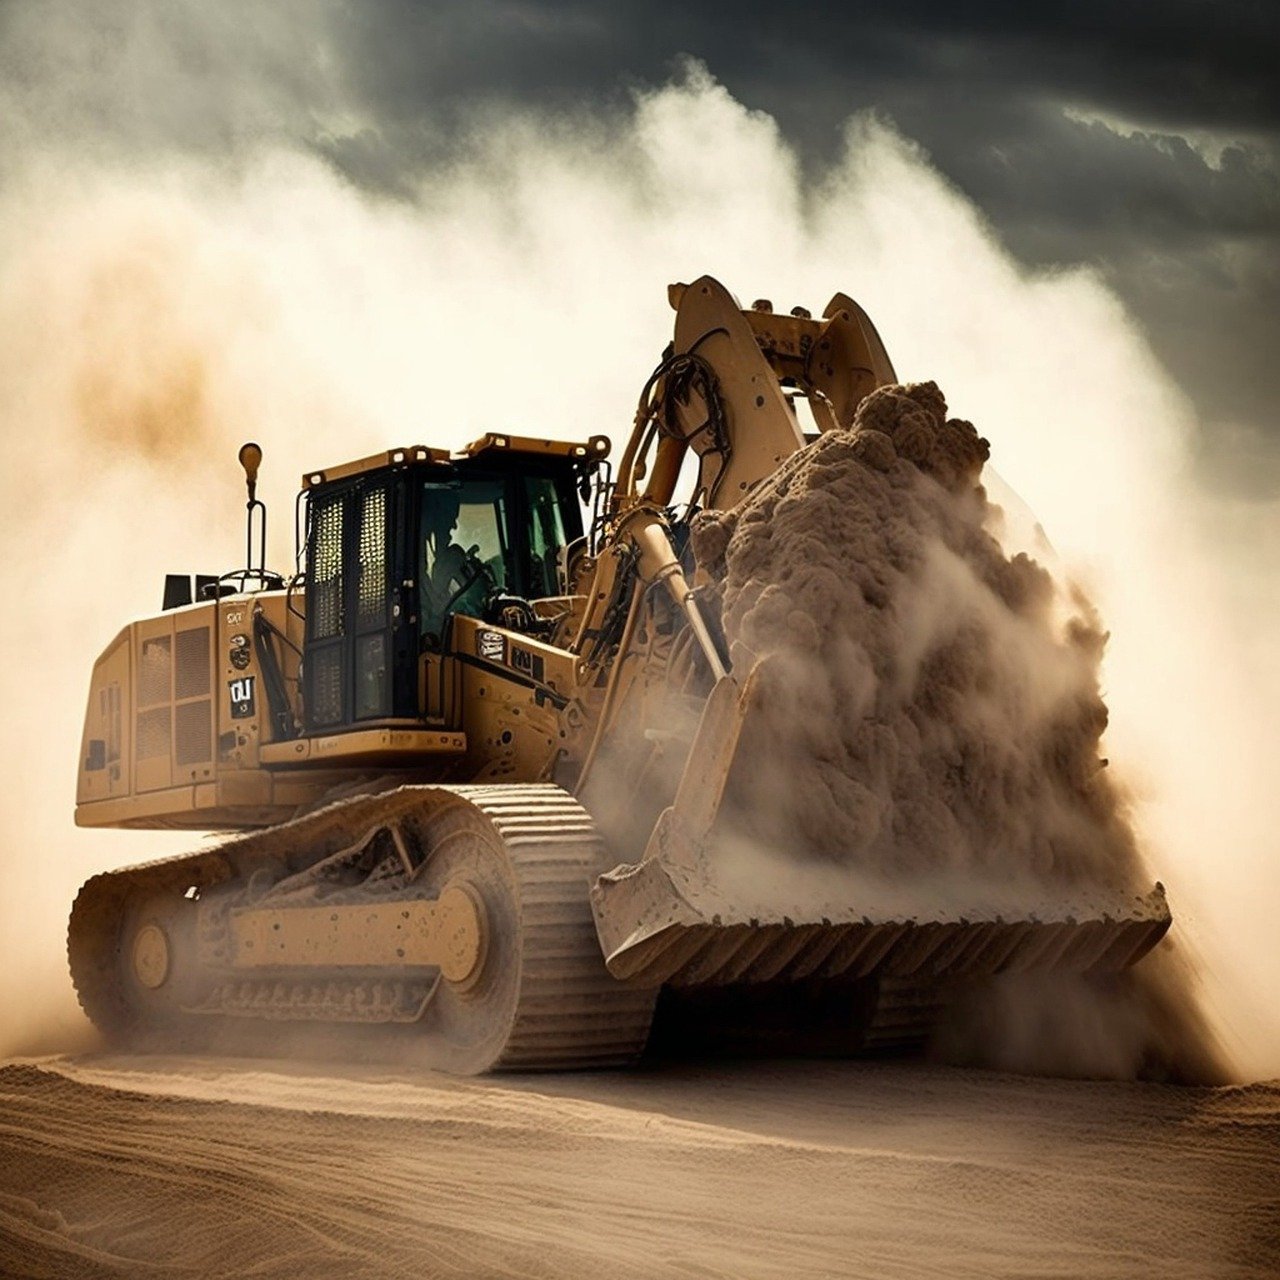 A robust construction vehicle moving earth, generating a large dust cloud, highlighting the need for dust control measures at construction sites.